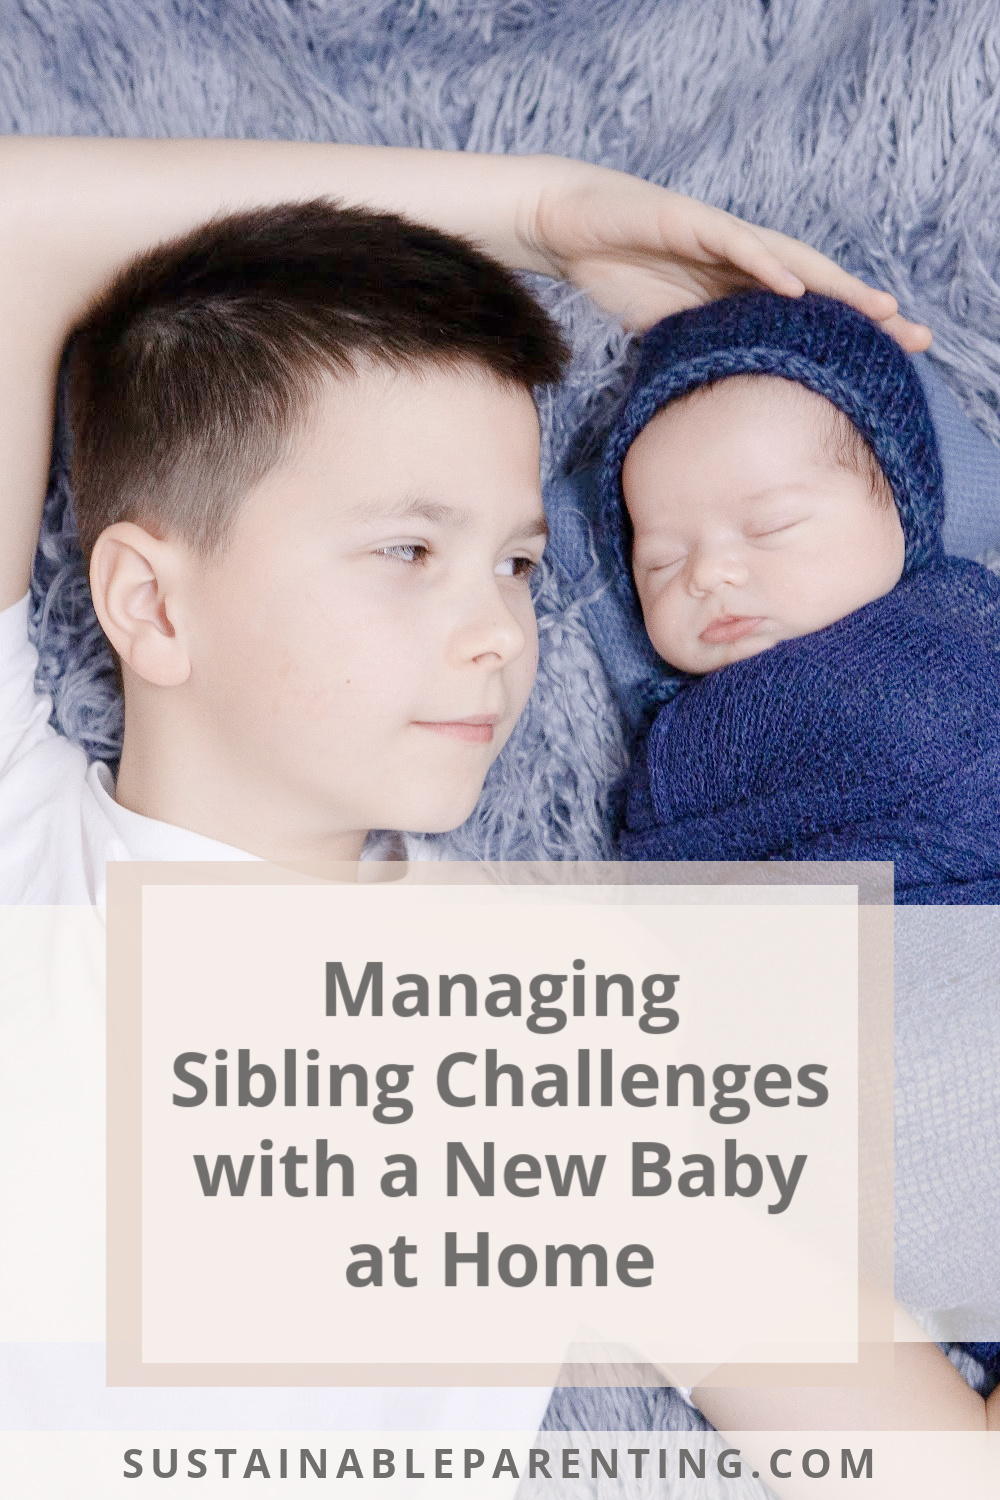 Managing Sibling Challenges with a New Baby at Home